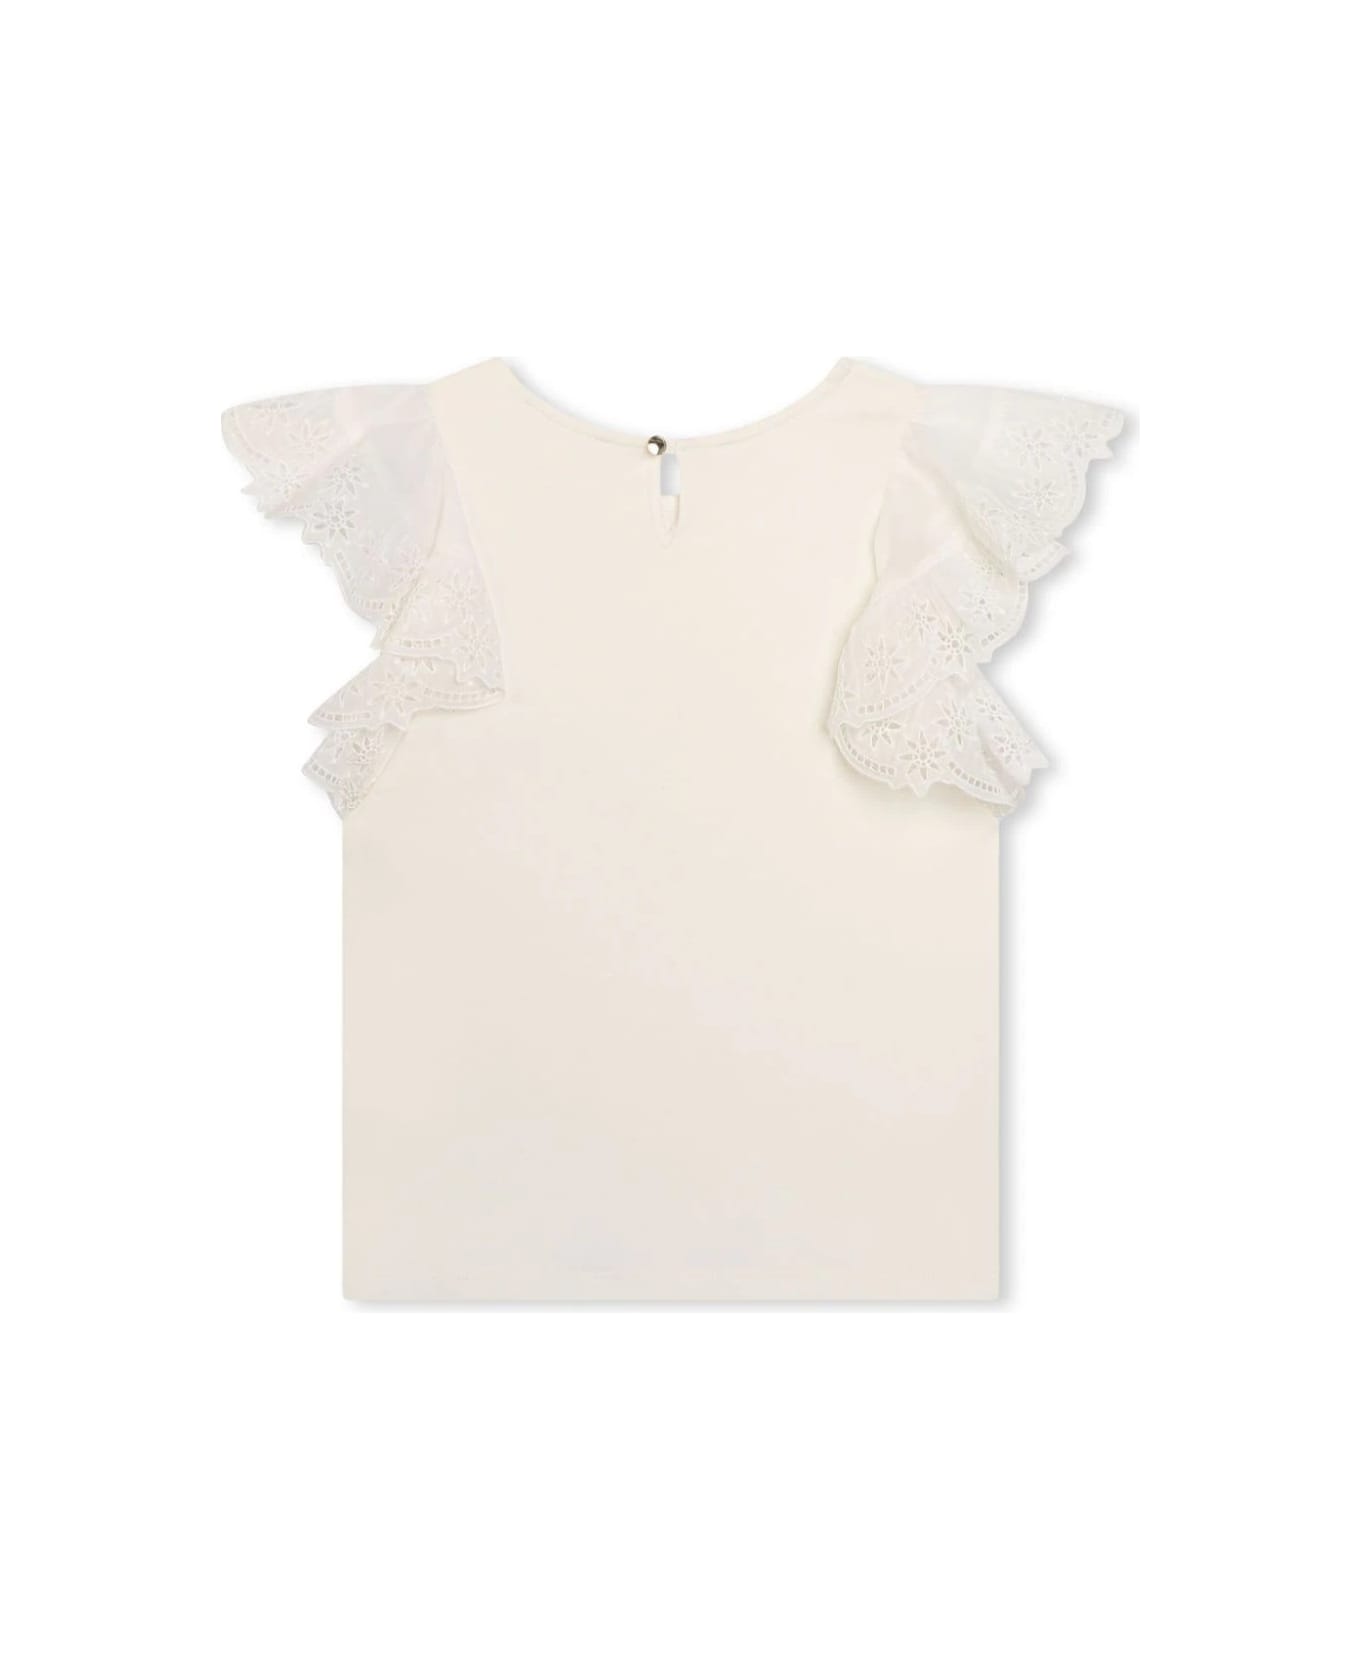 Chloé White Top With Embroidered Ruffles - Bianco トップス